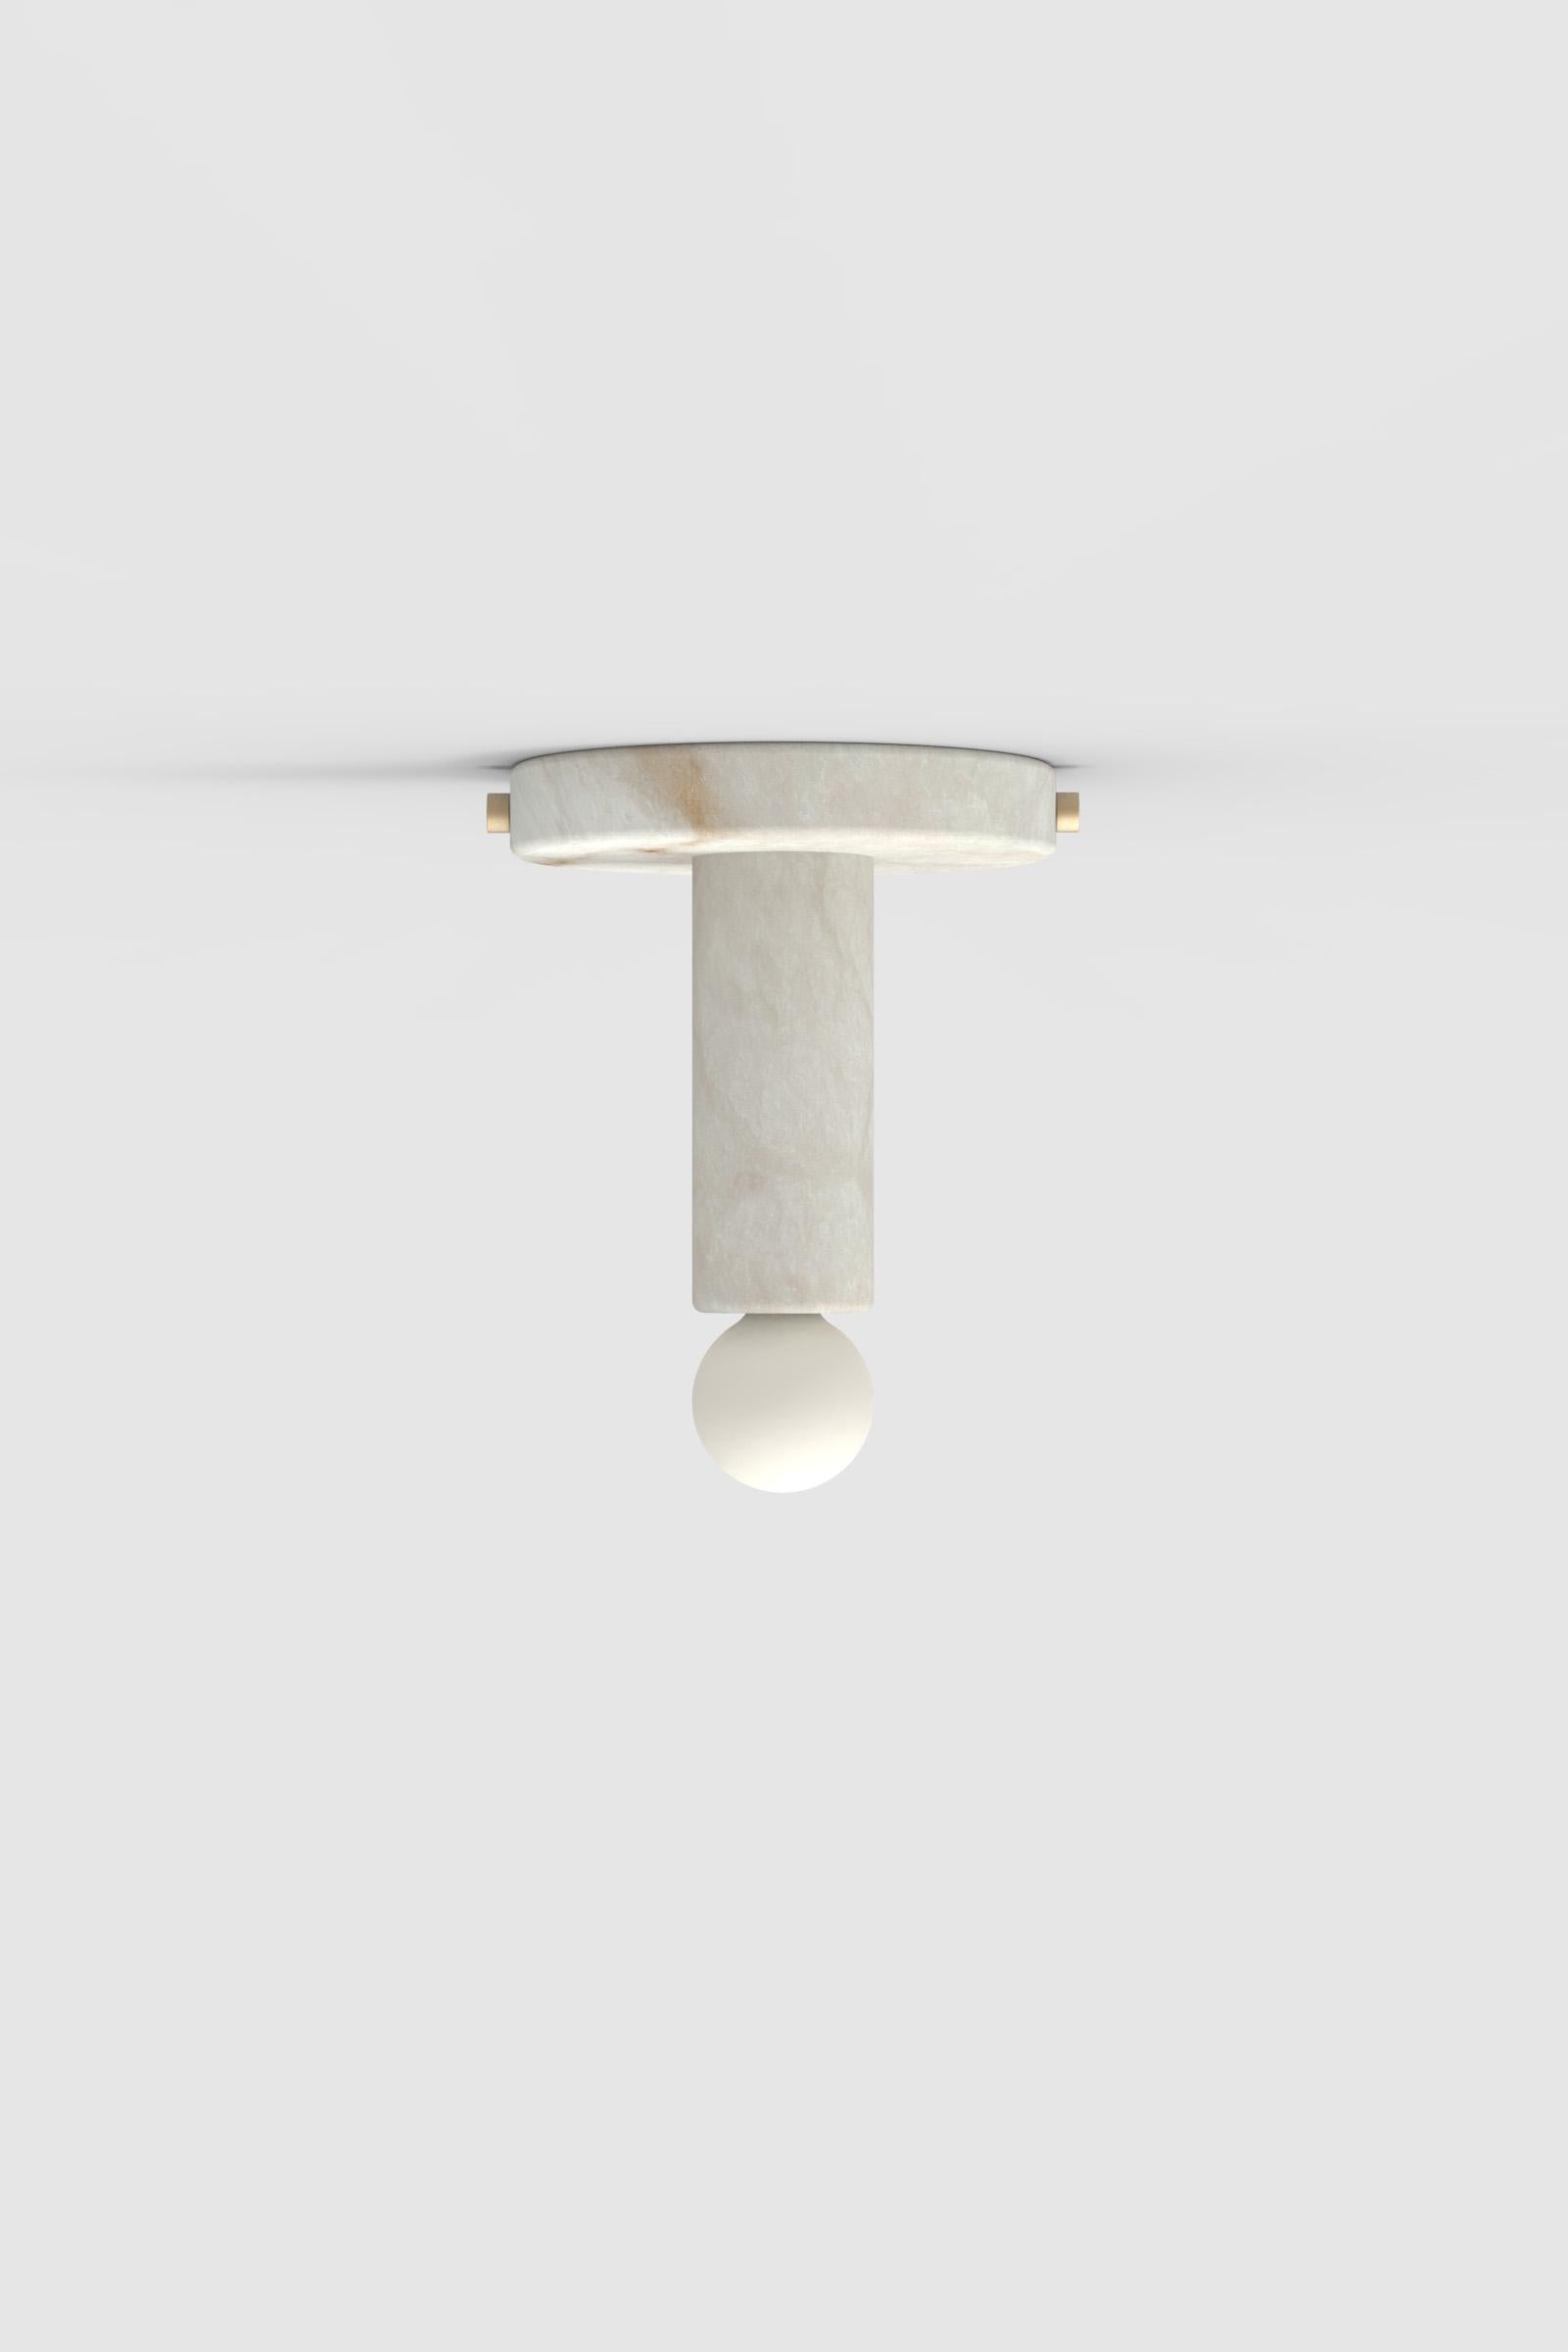 Post-Modern Contemporary Poppi Sconce 301A in Alabaster by Orphan Work For Sale